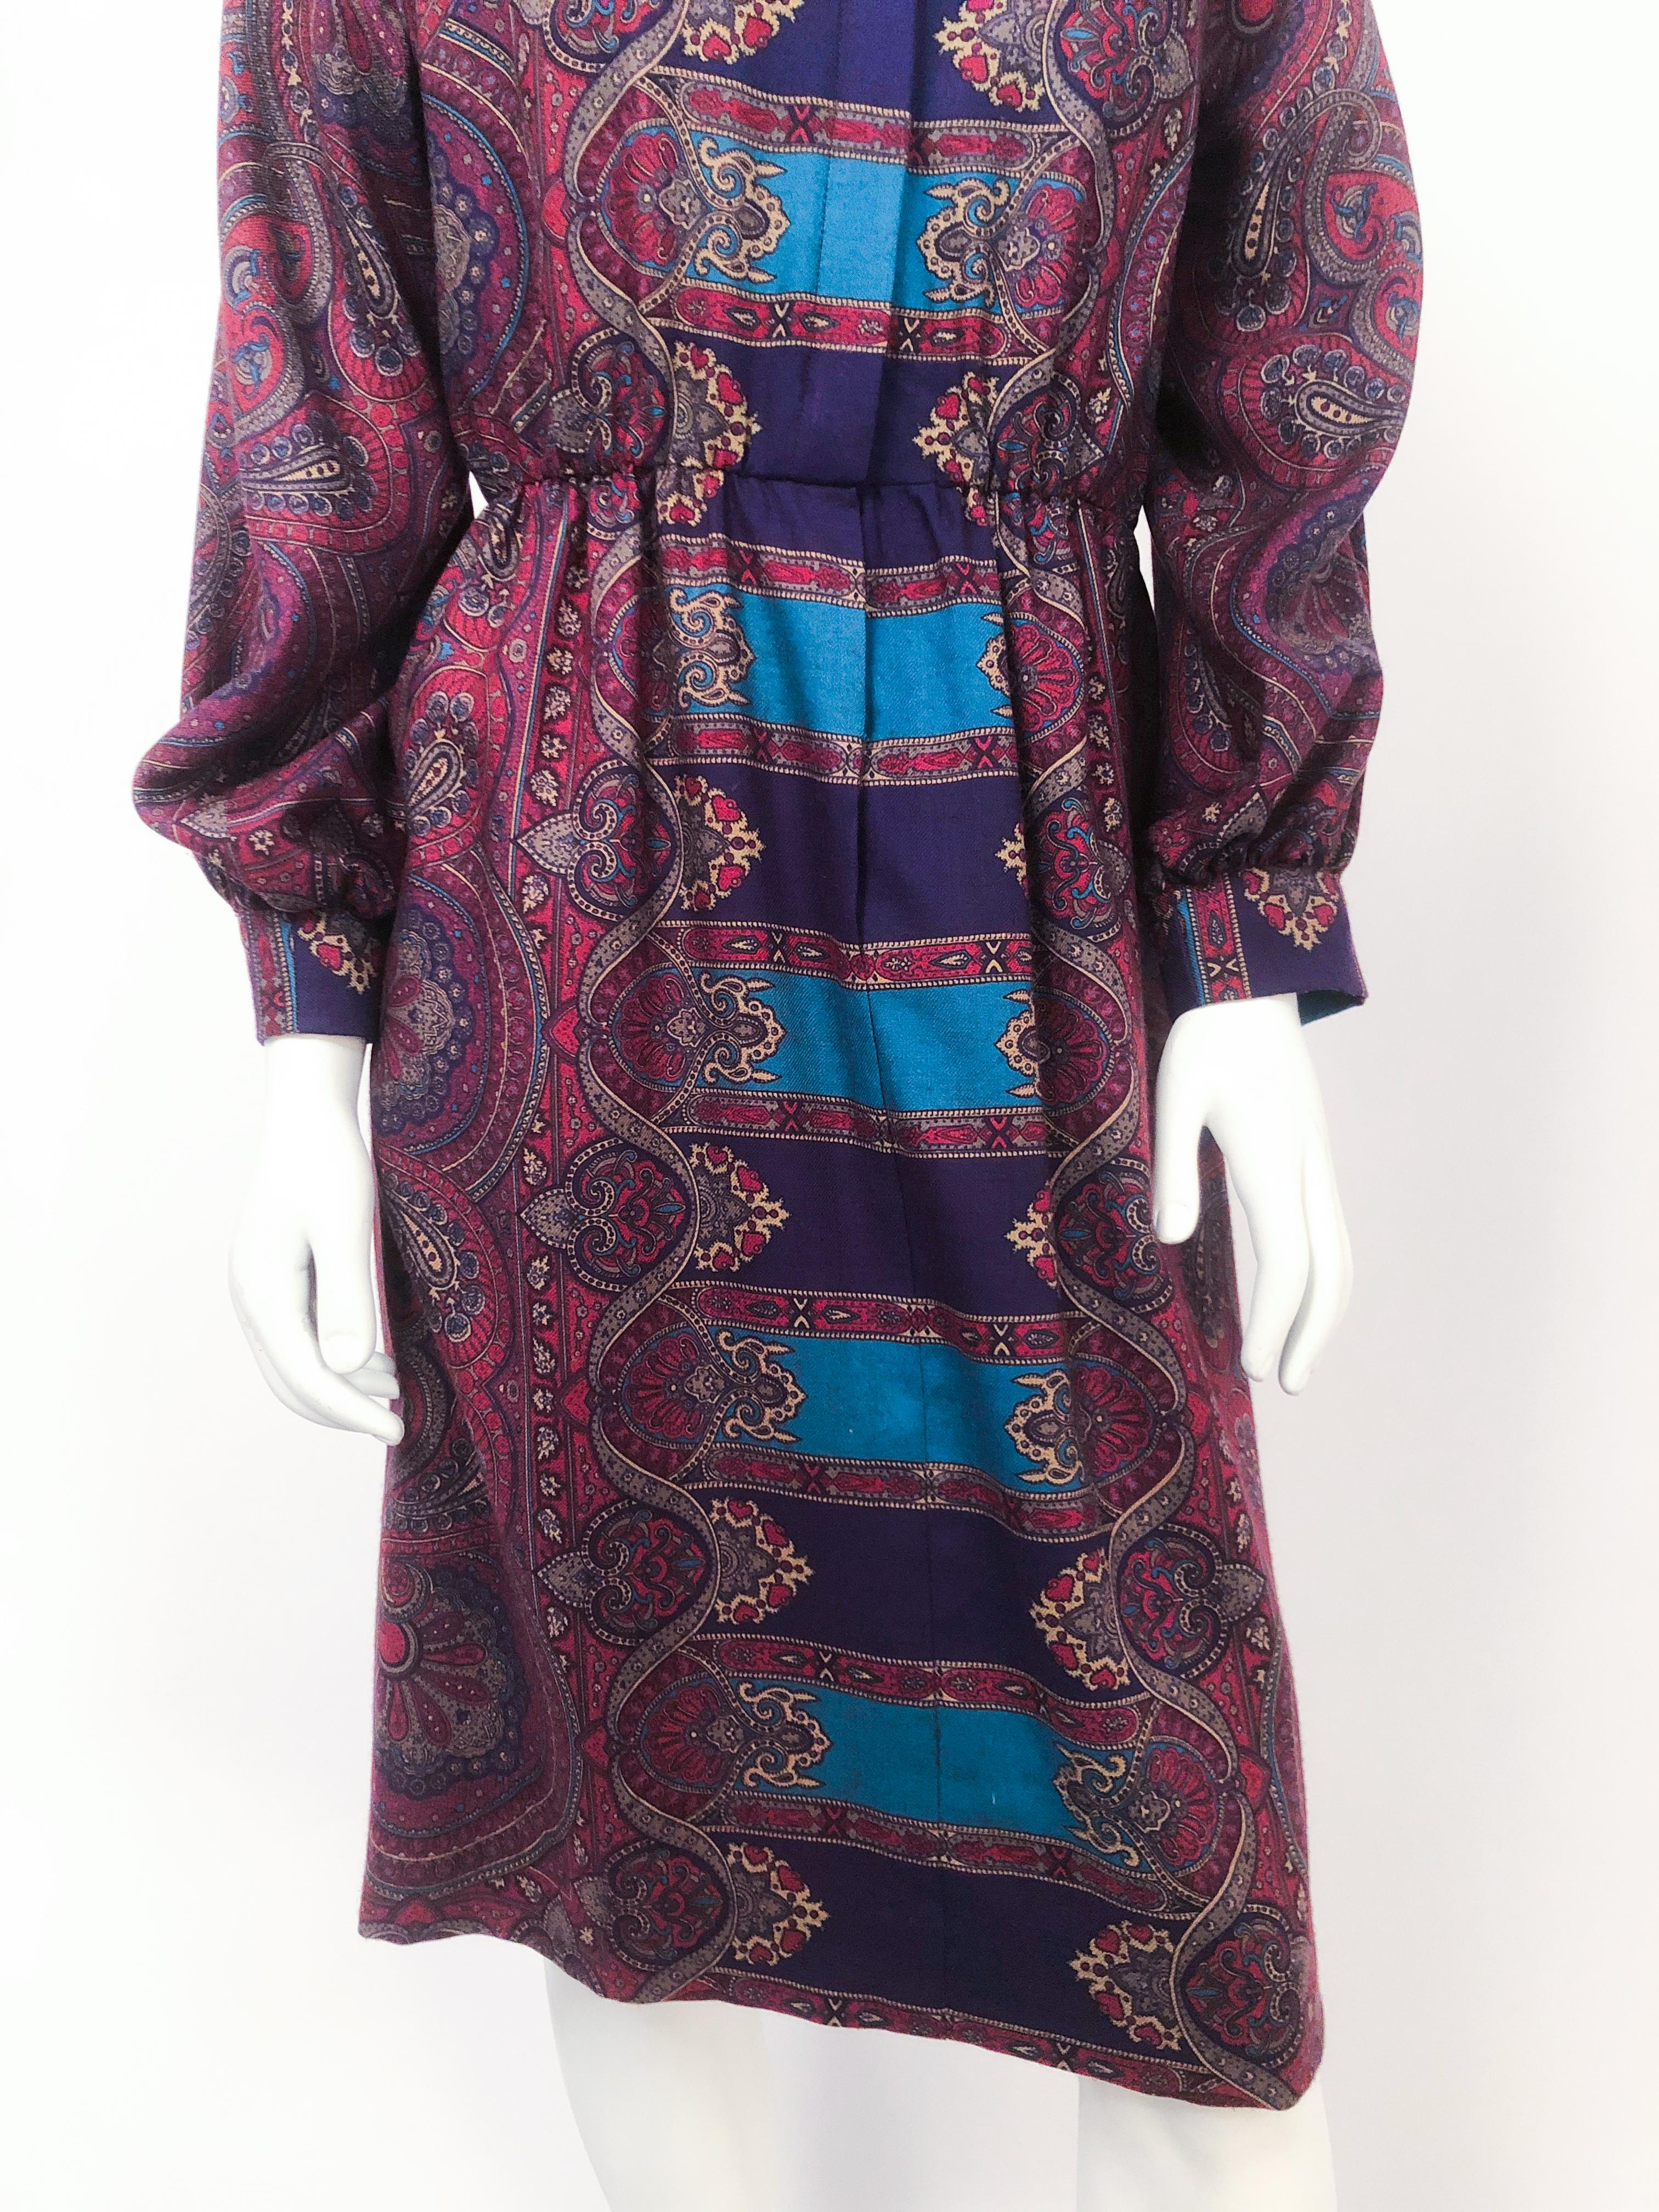 1960s Helga Howie Jewel Toned Paisley Dress with cuffed/gathered sleeves, elastic waist, nehru collar, lined in silk, and buttoned front closure. Made of wool challis. 